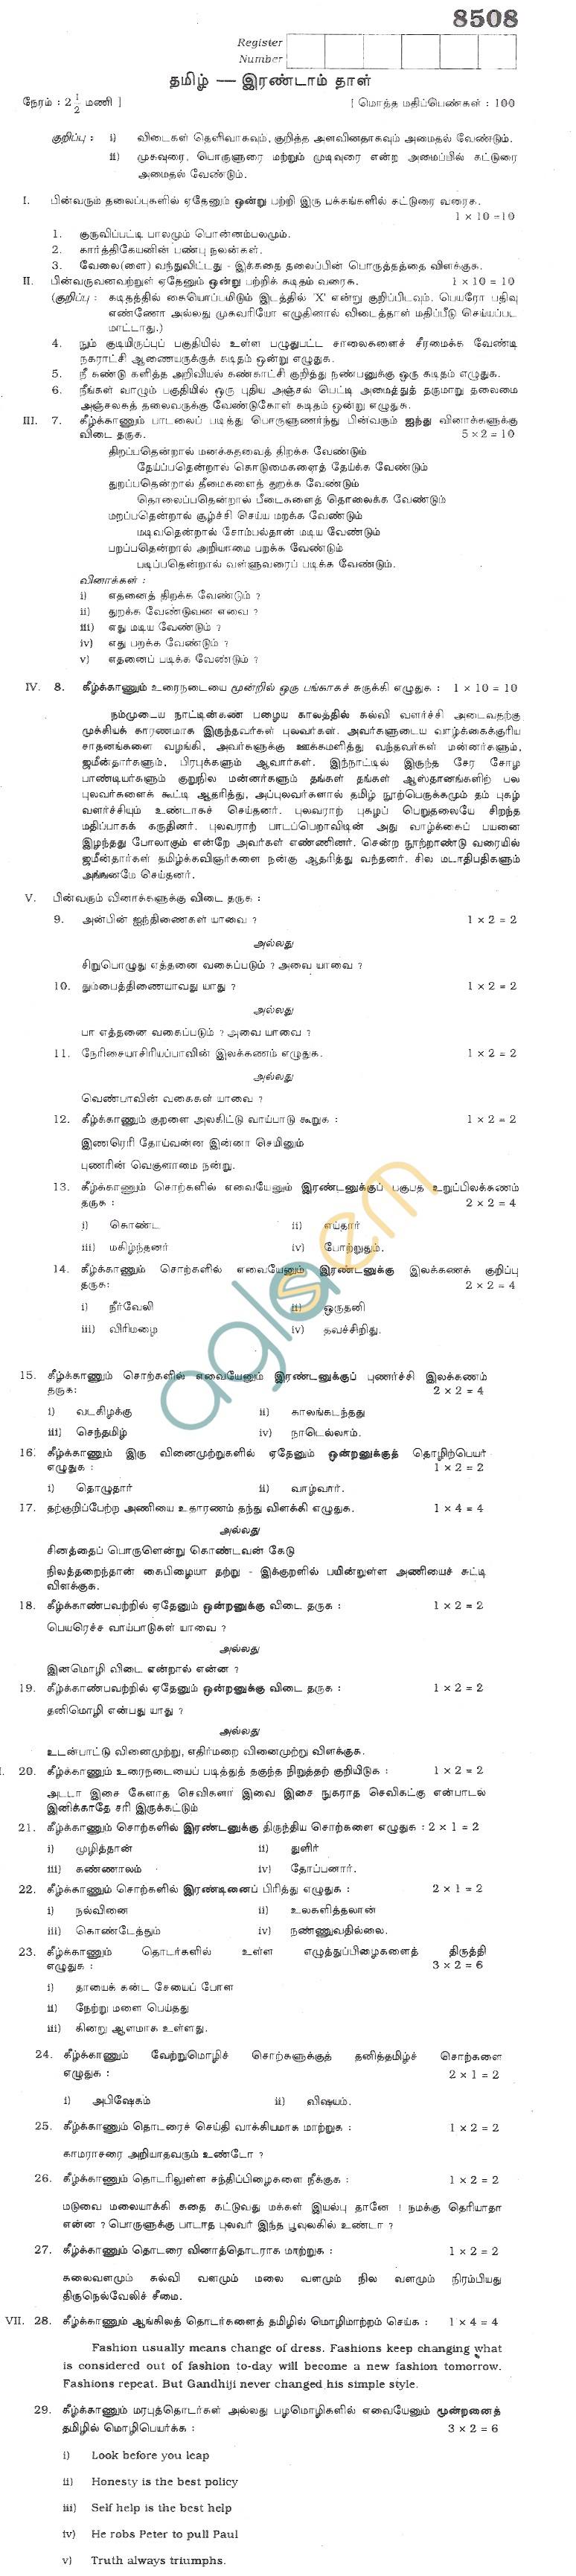 TN Board Matriculation Tamil Question Papers September 2011